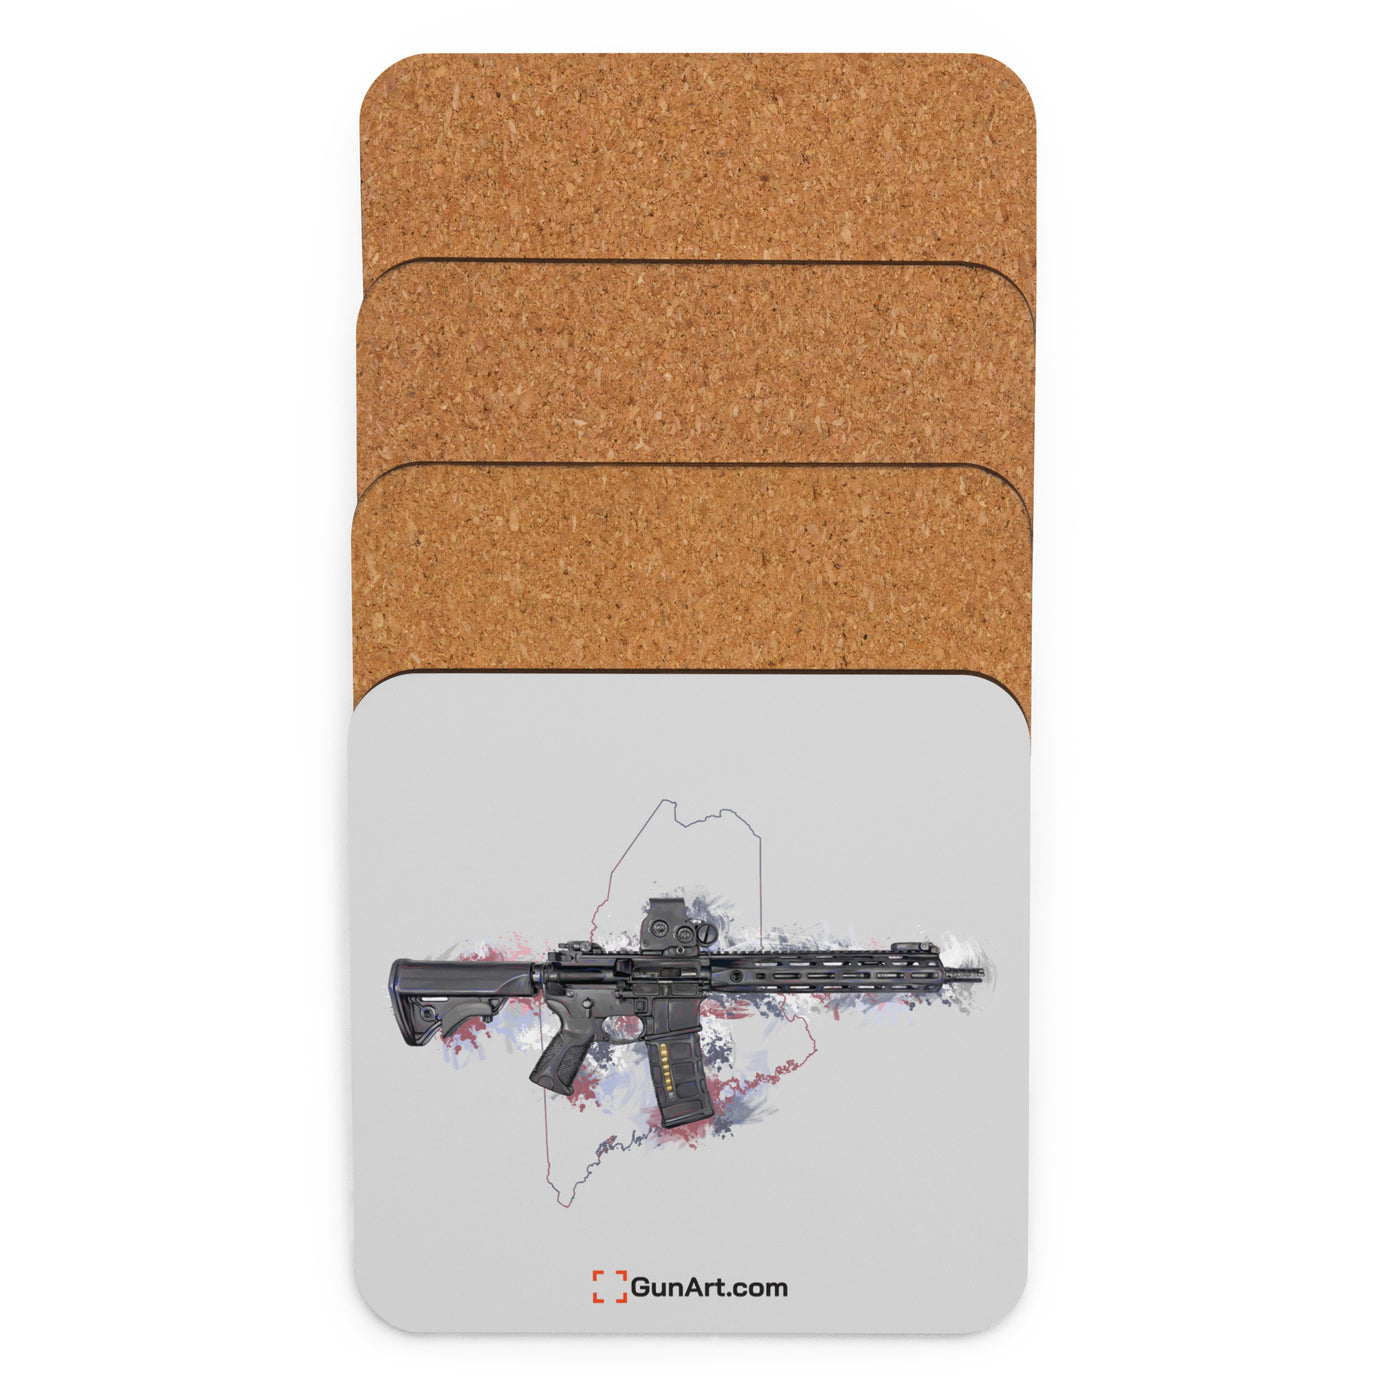 Defending Freedom - Maine - AR-15 State Cork-back Coaster - Colored State